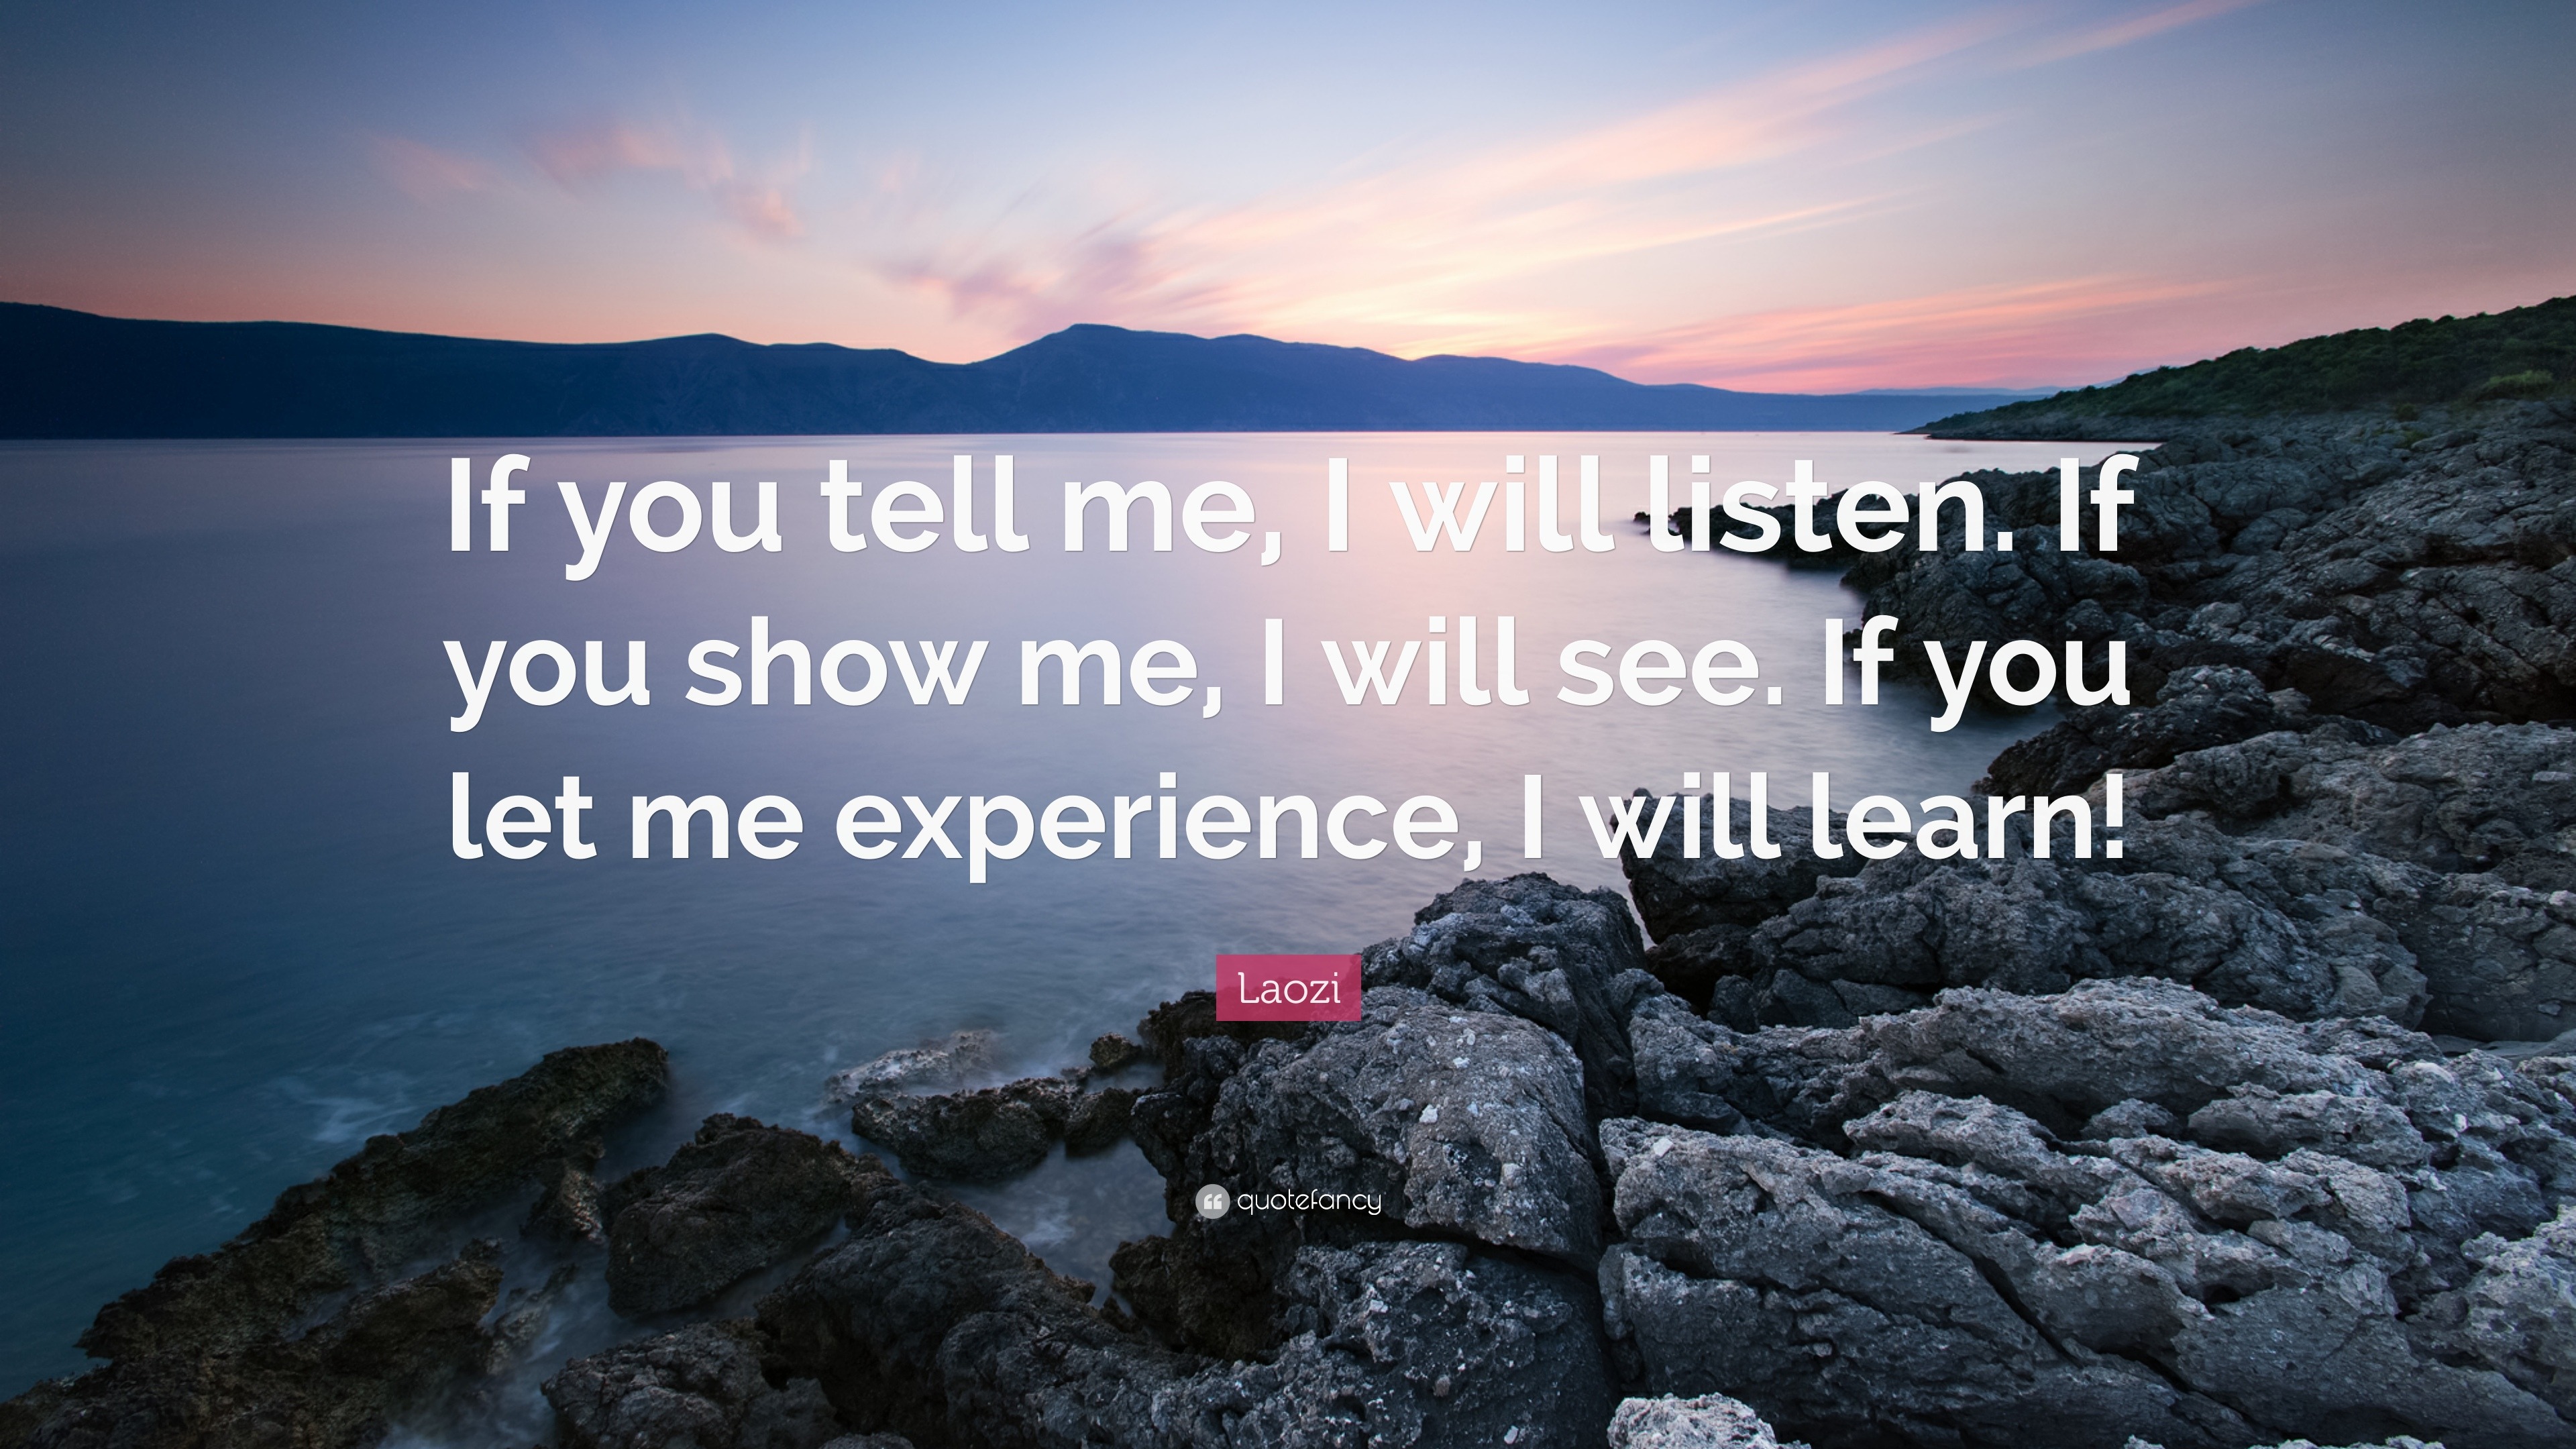 Laozi Quote If You Tell Me I Will Listen If You Show Me I Will See If You Let Me Experience I Will Learn 7 Wallpapers Quotefancy